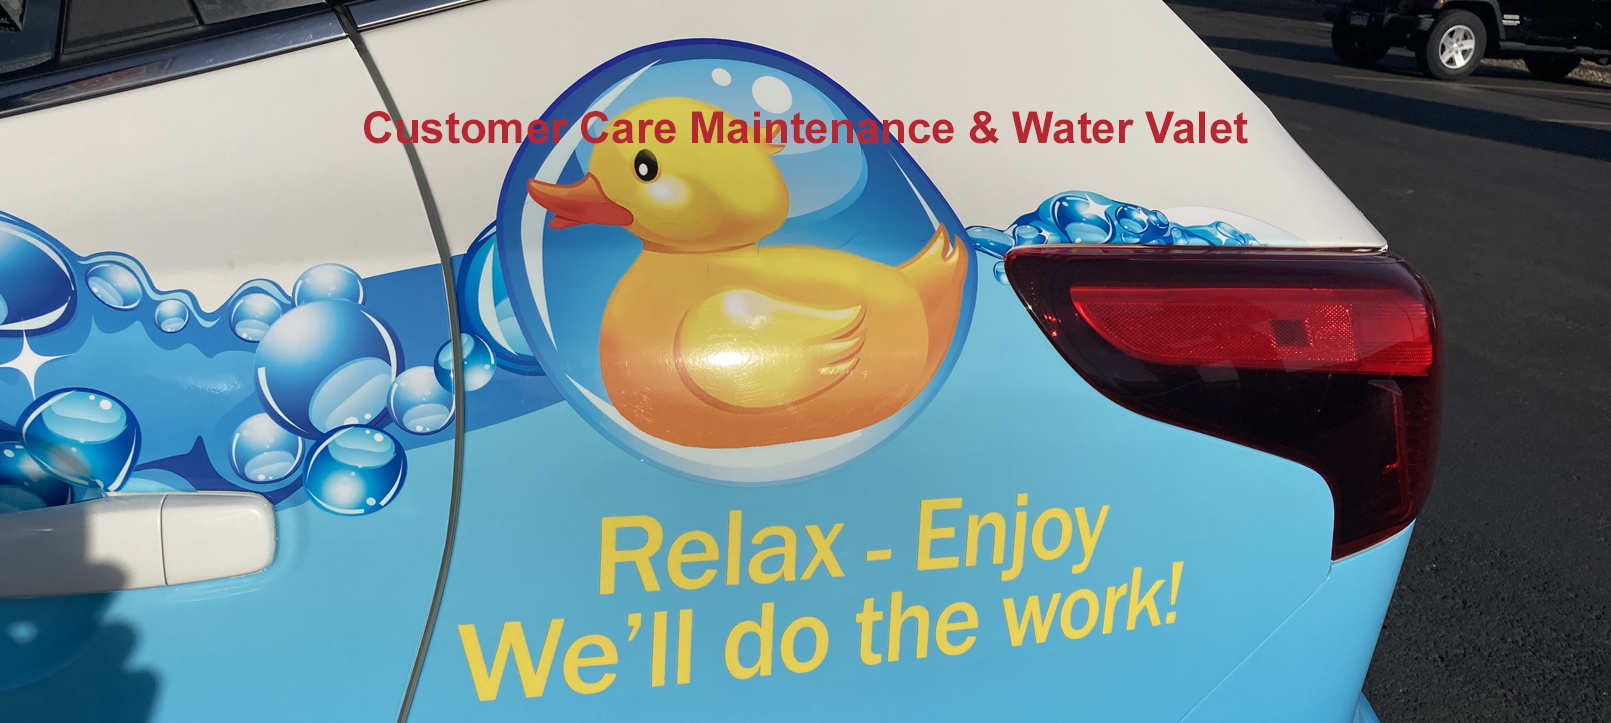 Customer Care now hiring water valet career positions